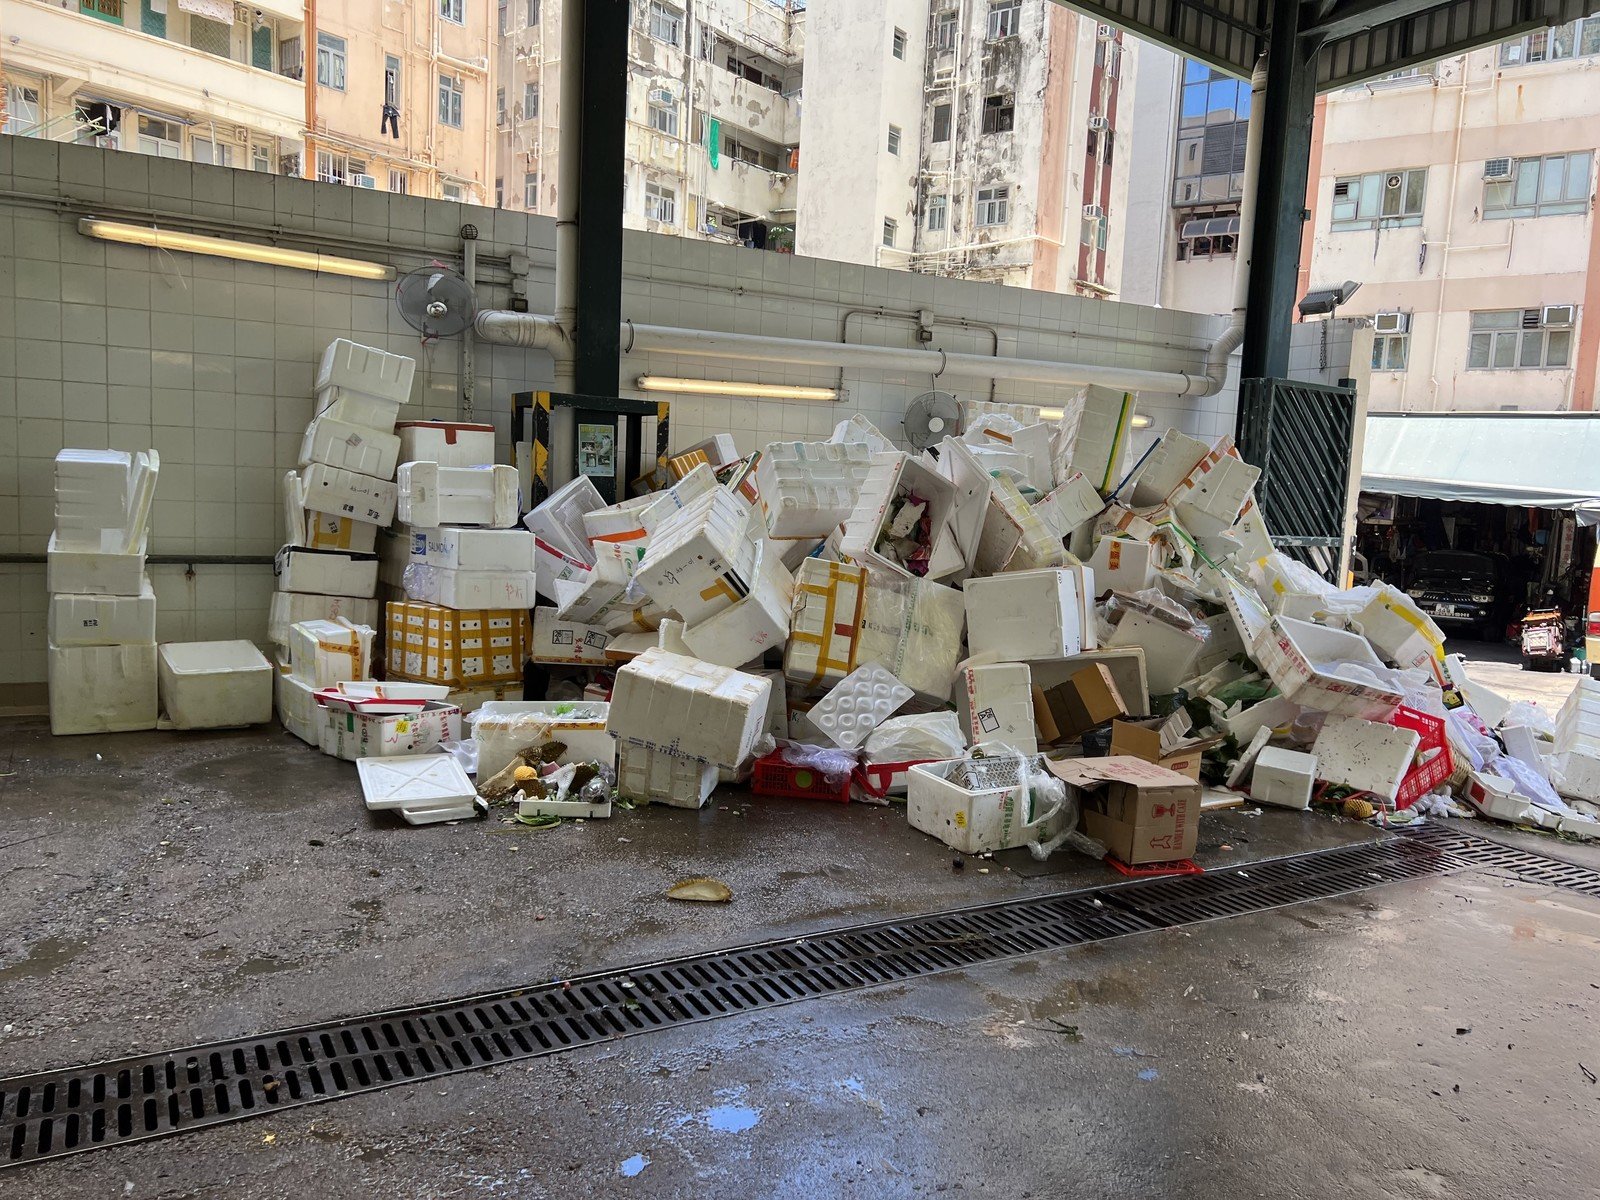 There is no refuse compactor in this RCP; waste is often piled up in a corner. Most of it is wet waste and comes from the markets nearby. This has exacerbated the RCP’s pest problem and caused workers to feel unwell.